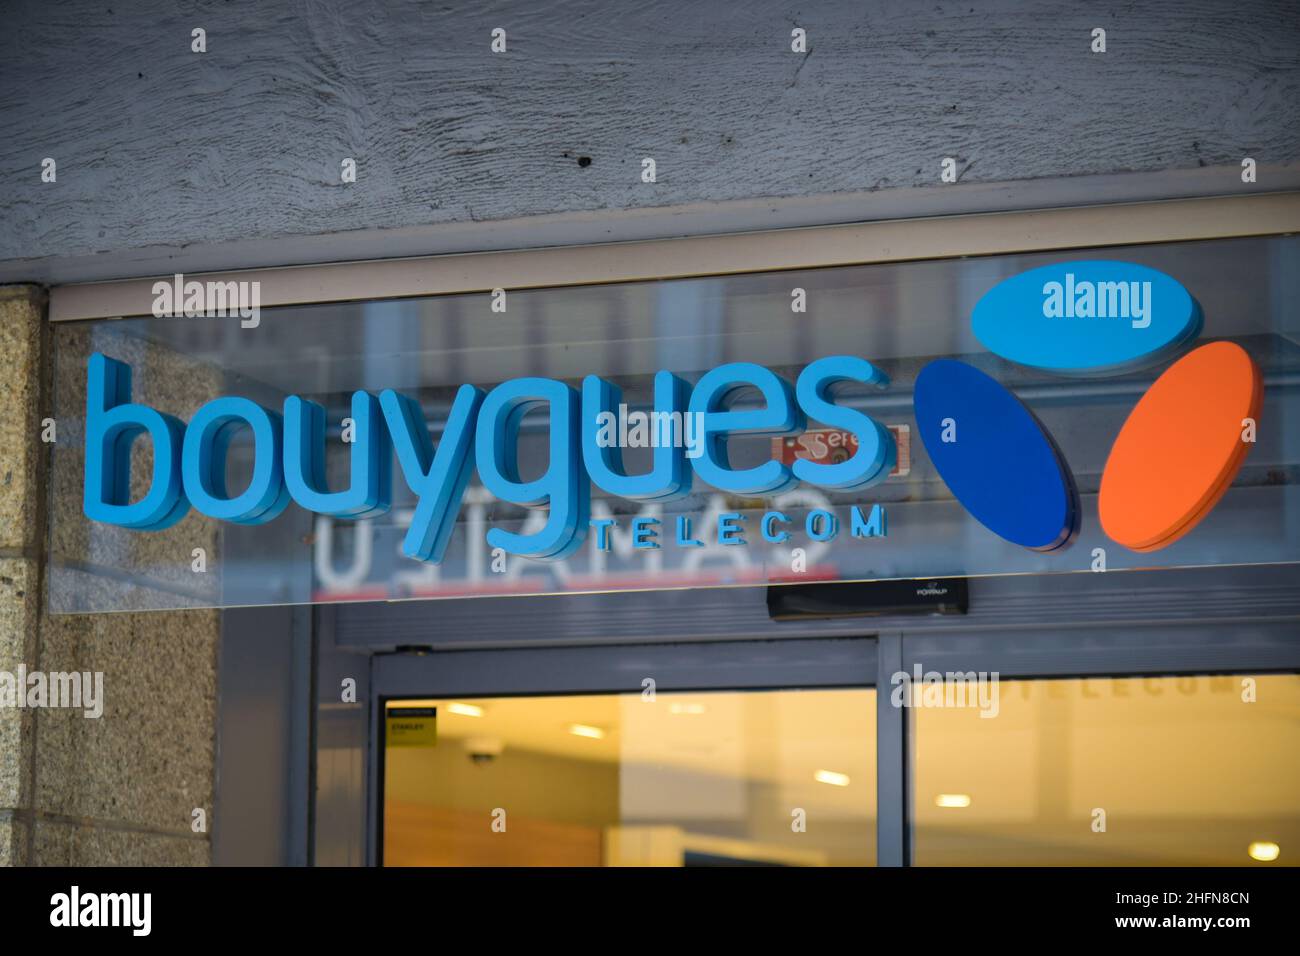 SEPTEMBER 2021 - QUIMPER - FRANCE: View on Bouygues Telecom signboard Stock Photo